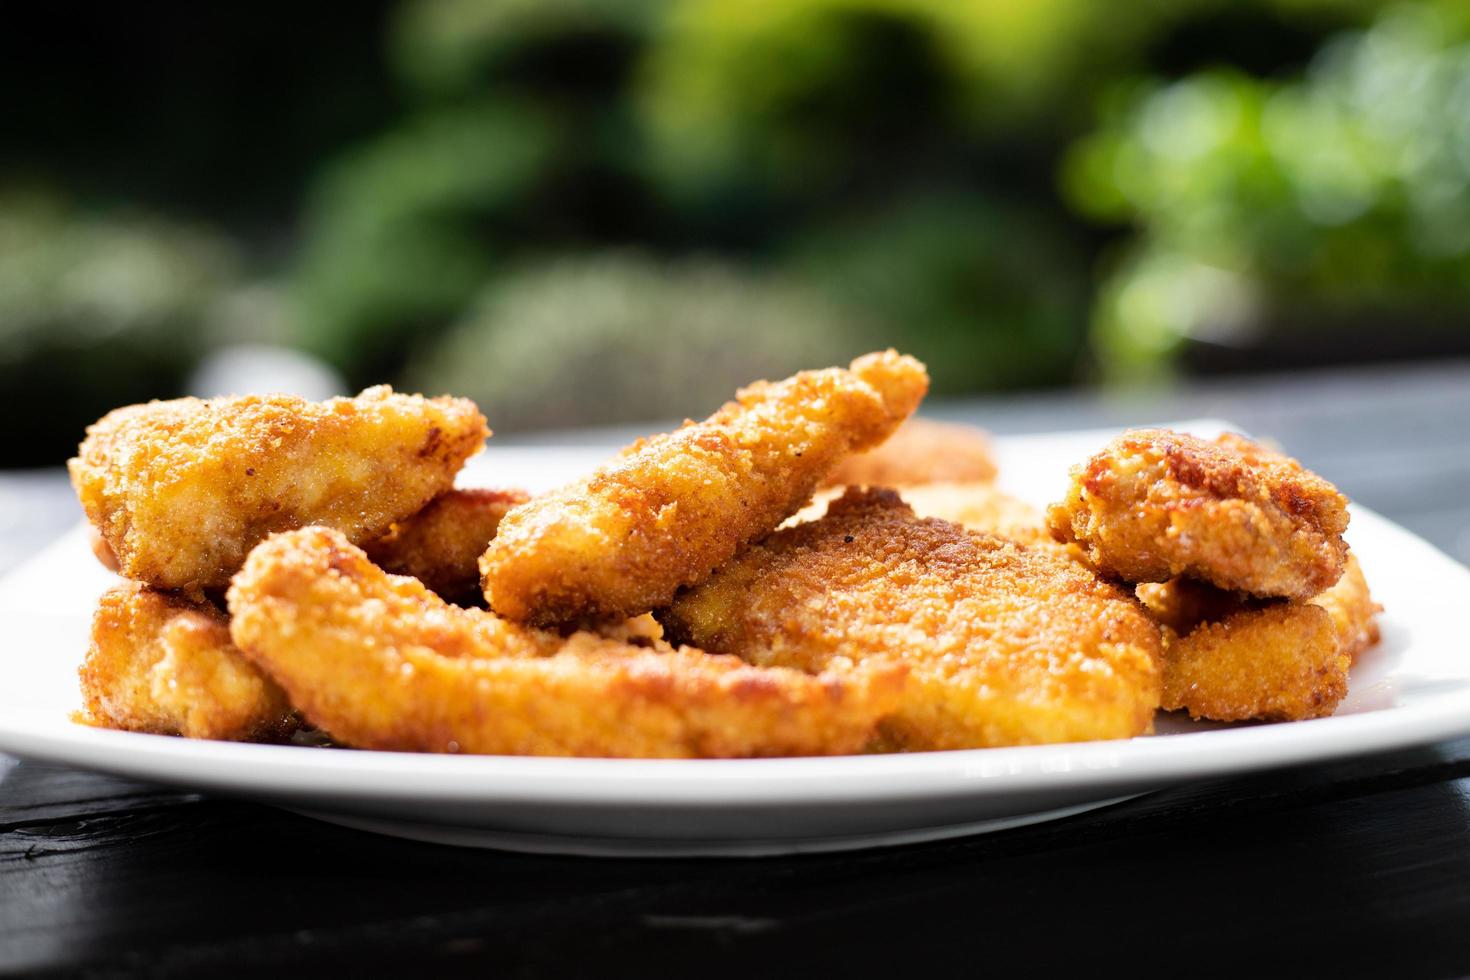 Breaded chicken pieces on a plate in a garden background. photo